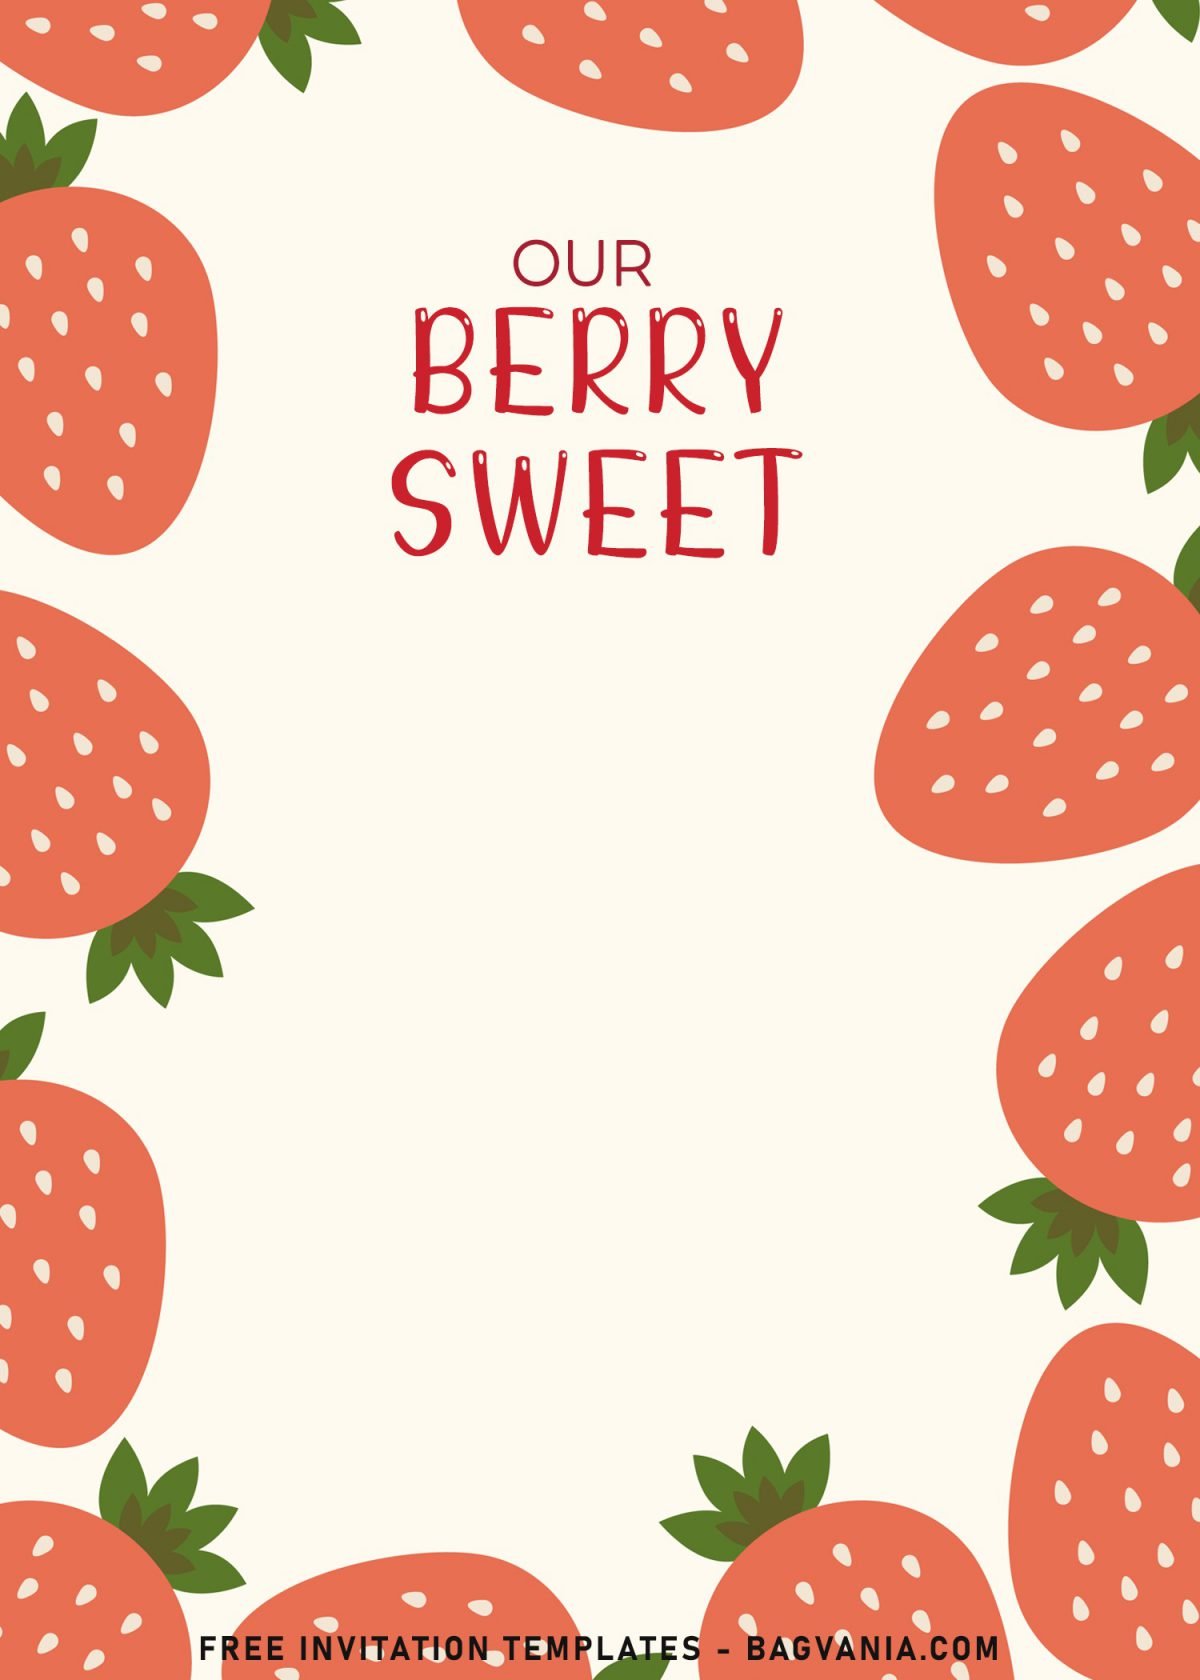 8+ Strawberry Birthday Invitation Templates For Girl Birthday Party and has hand drawn strawberries